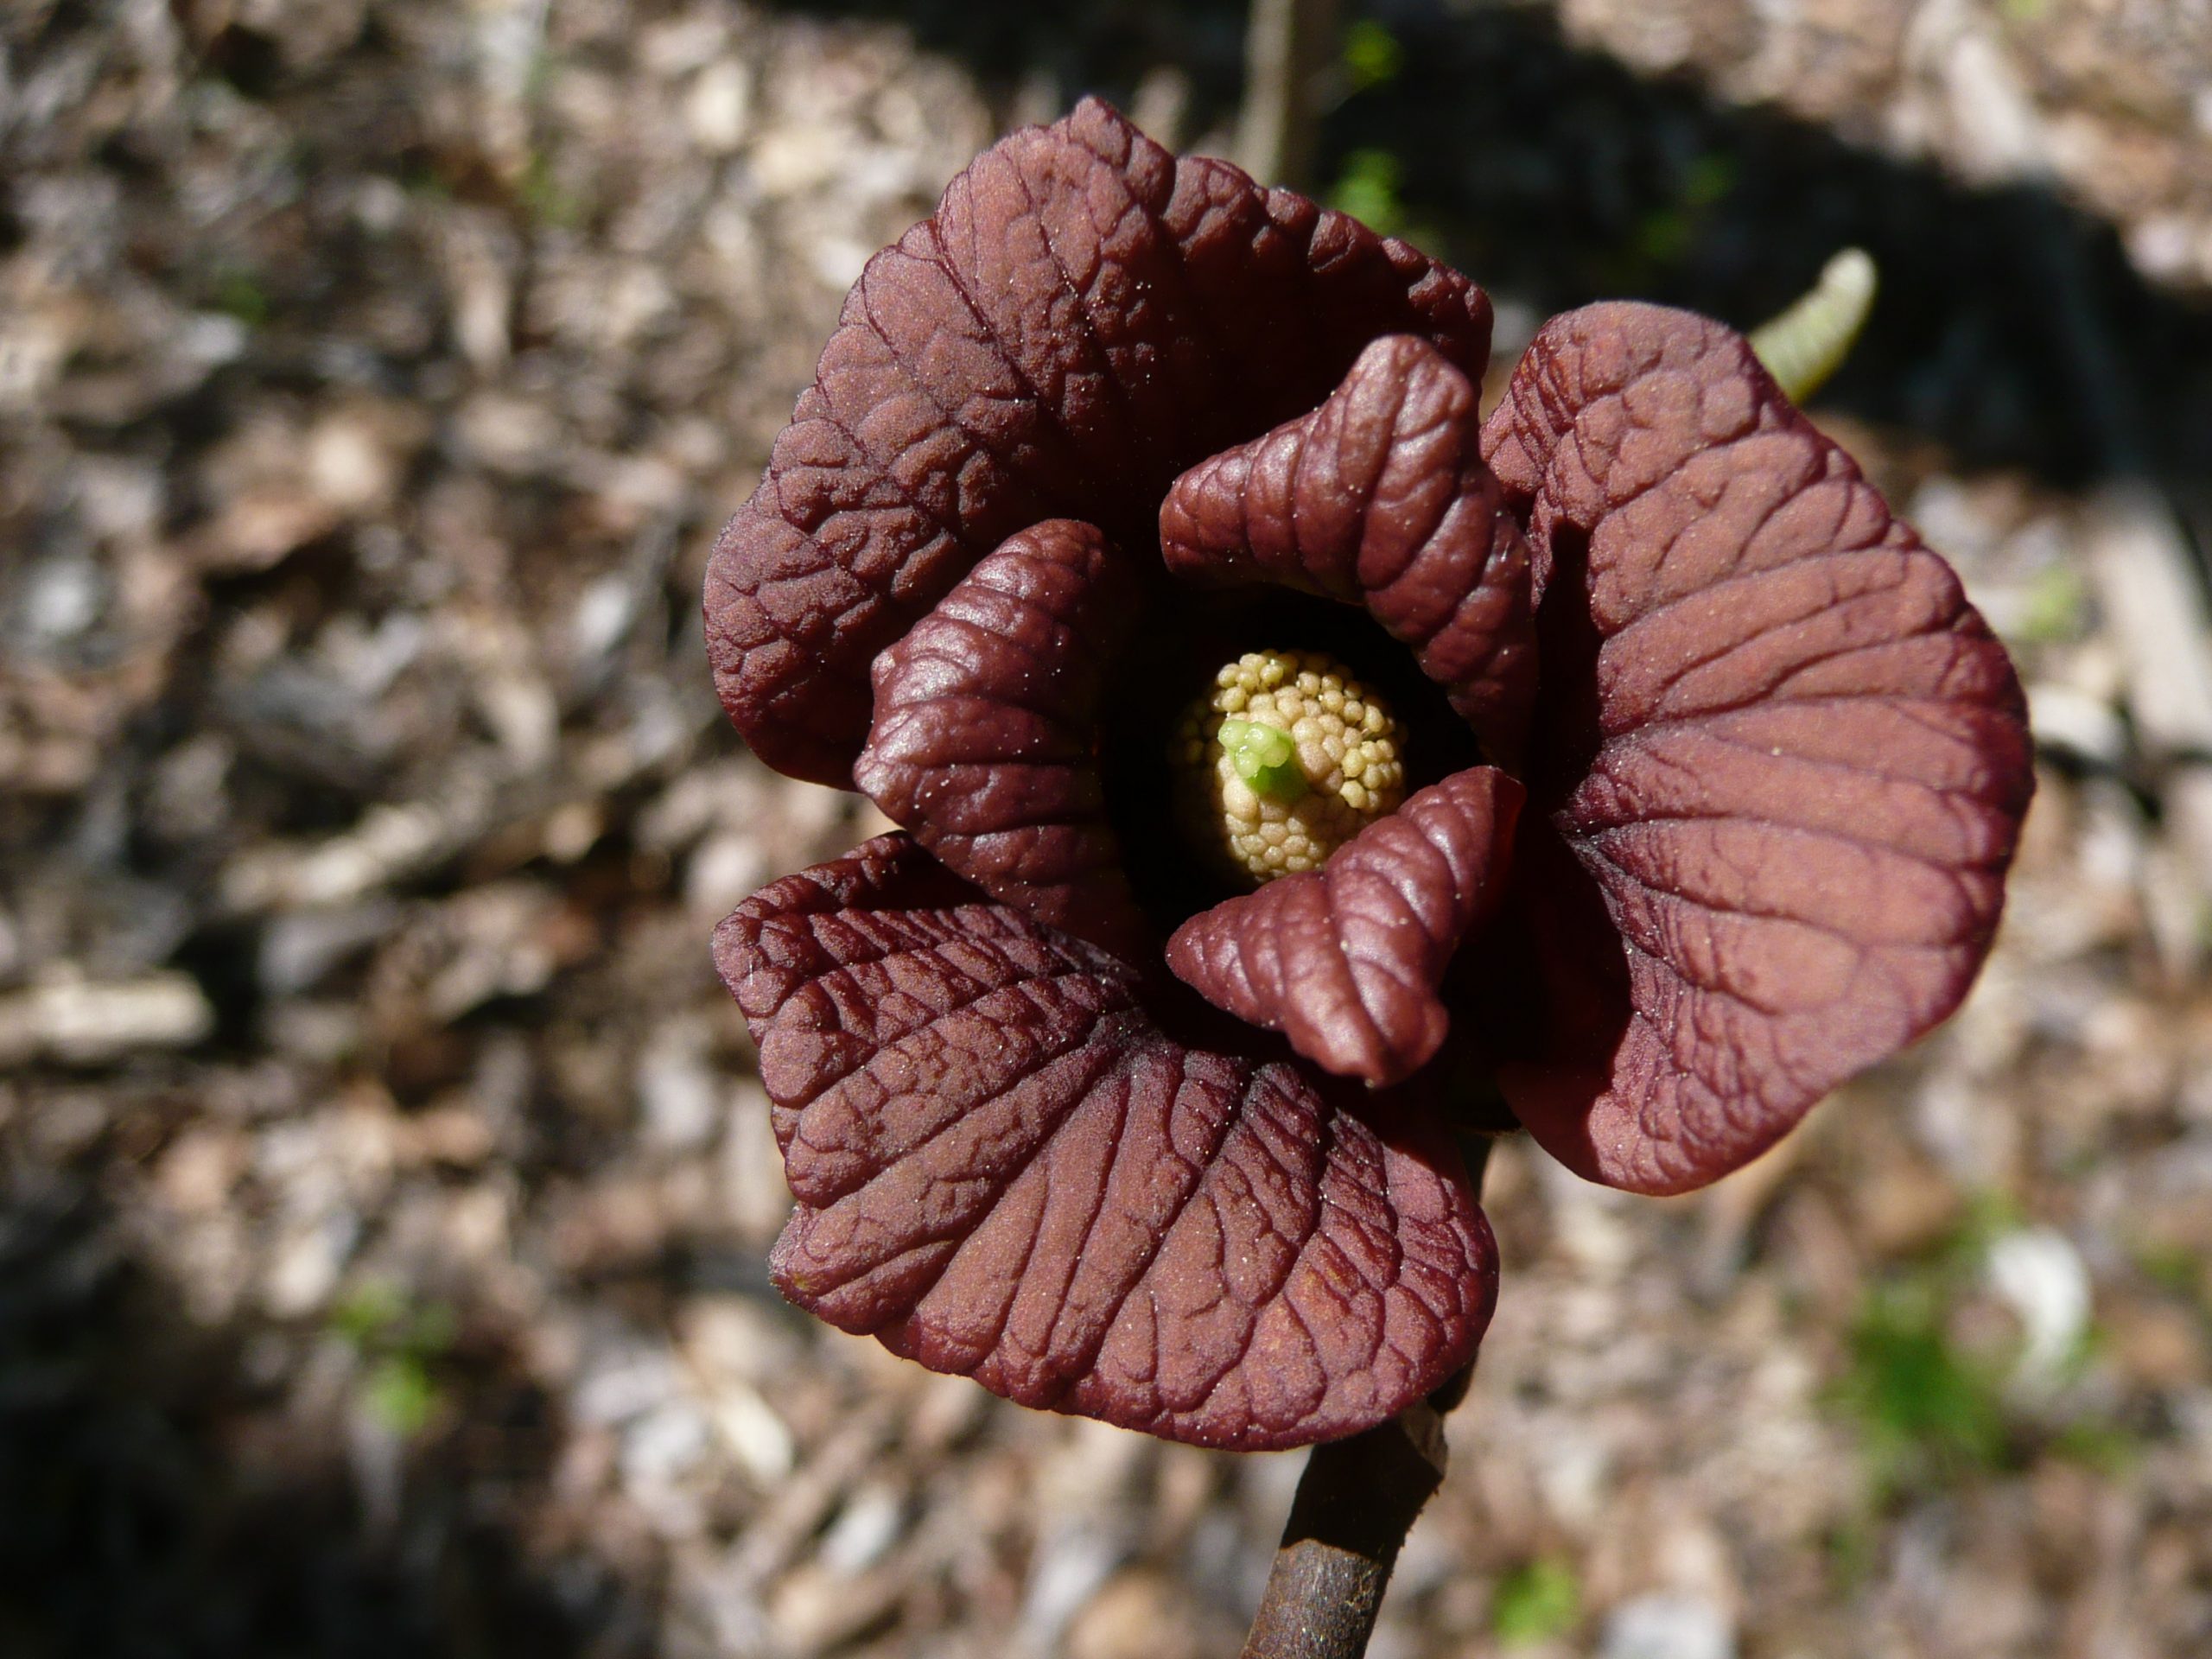 The lovely, delicate bloom of a pawpaw, which appears before any foliage emerges, is a lovely deep maroon hue.
